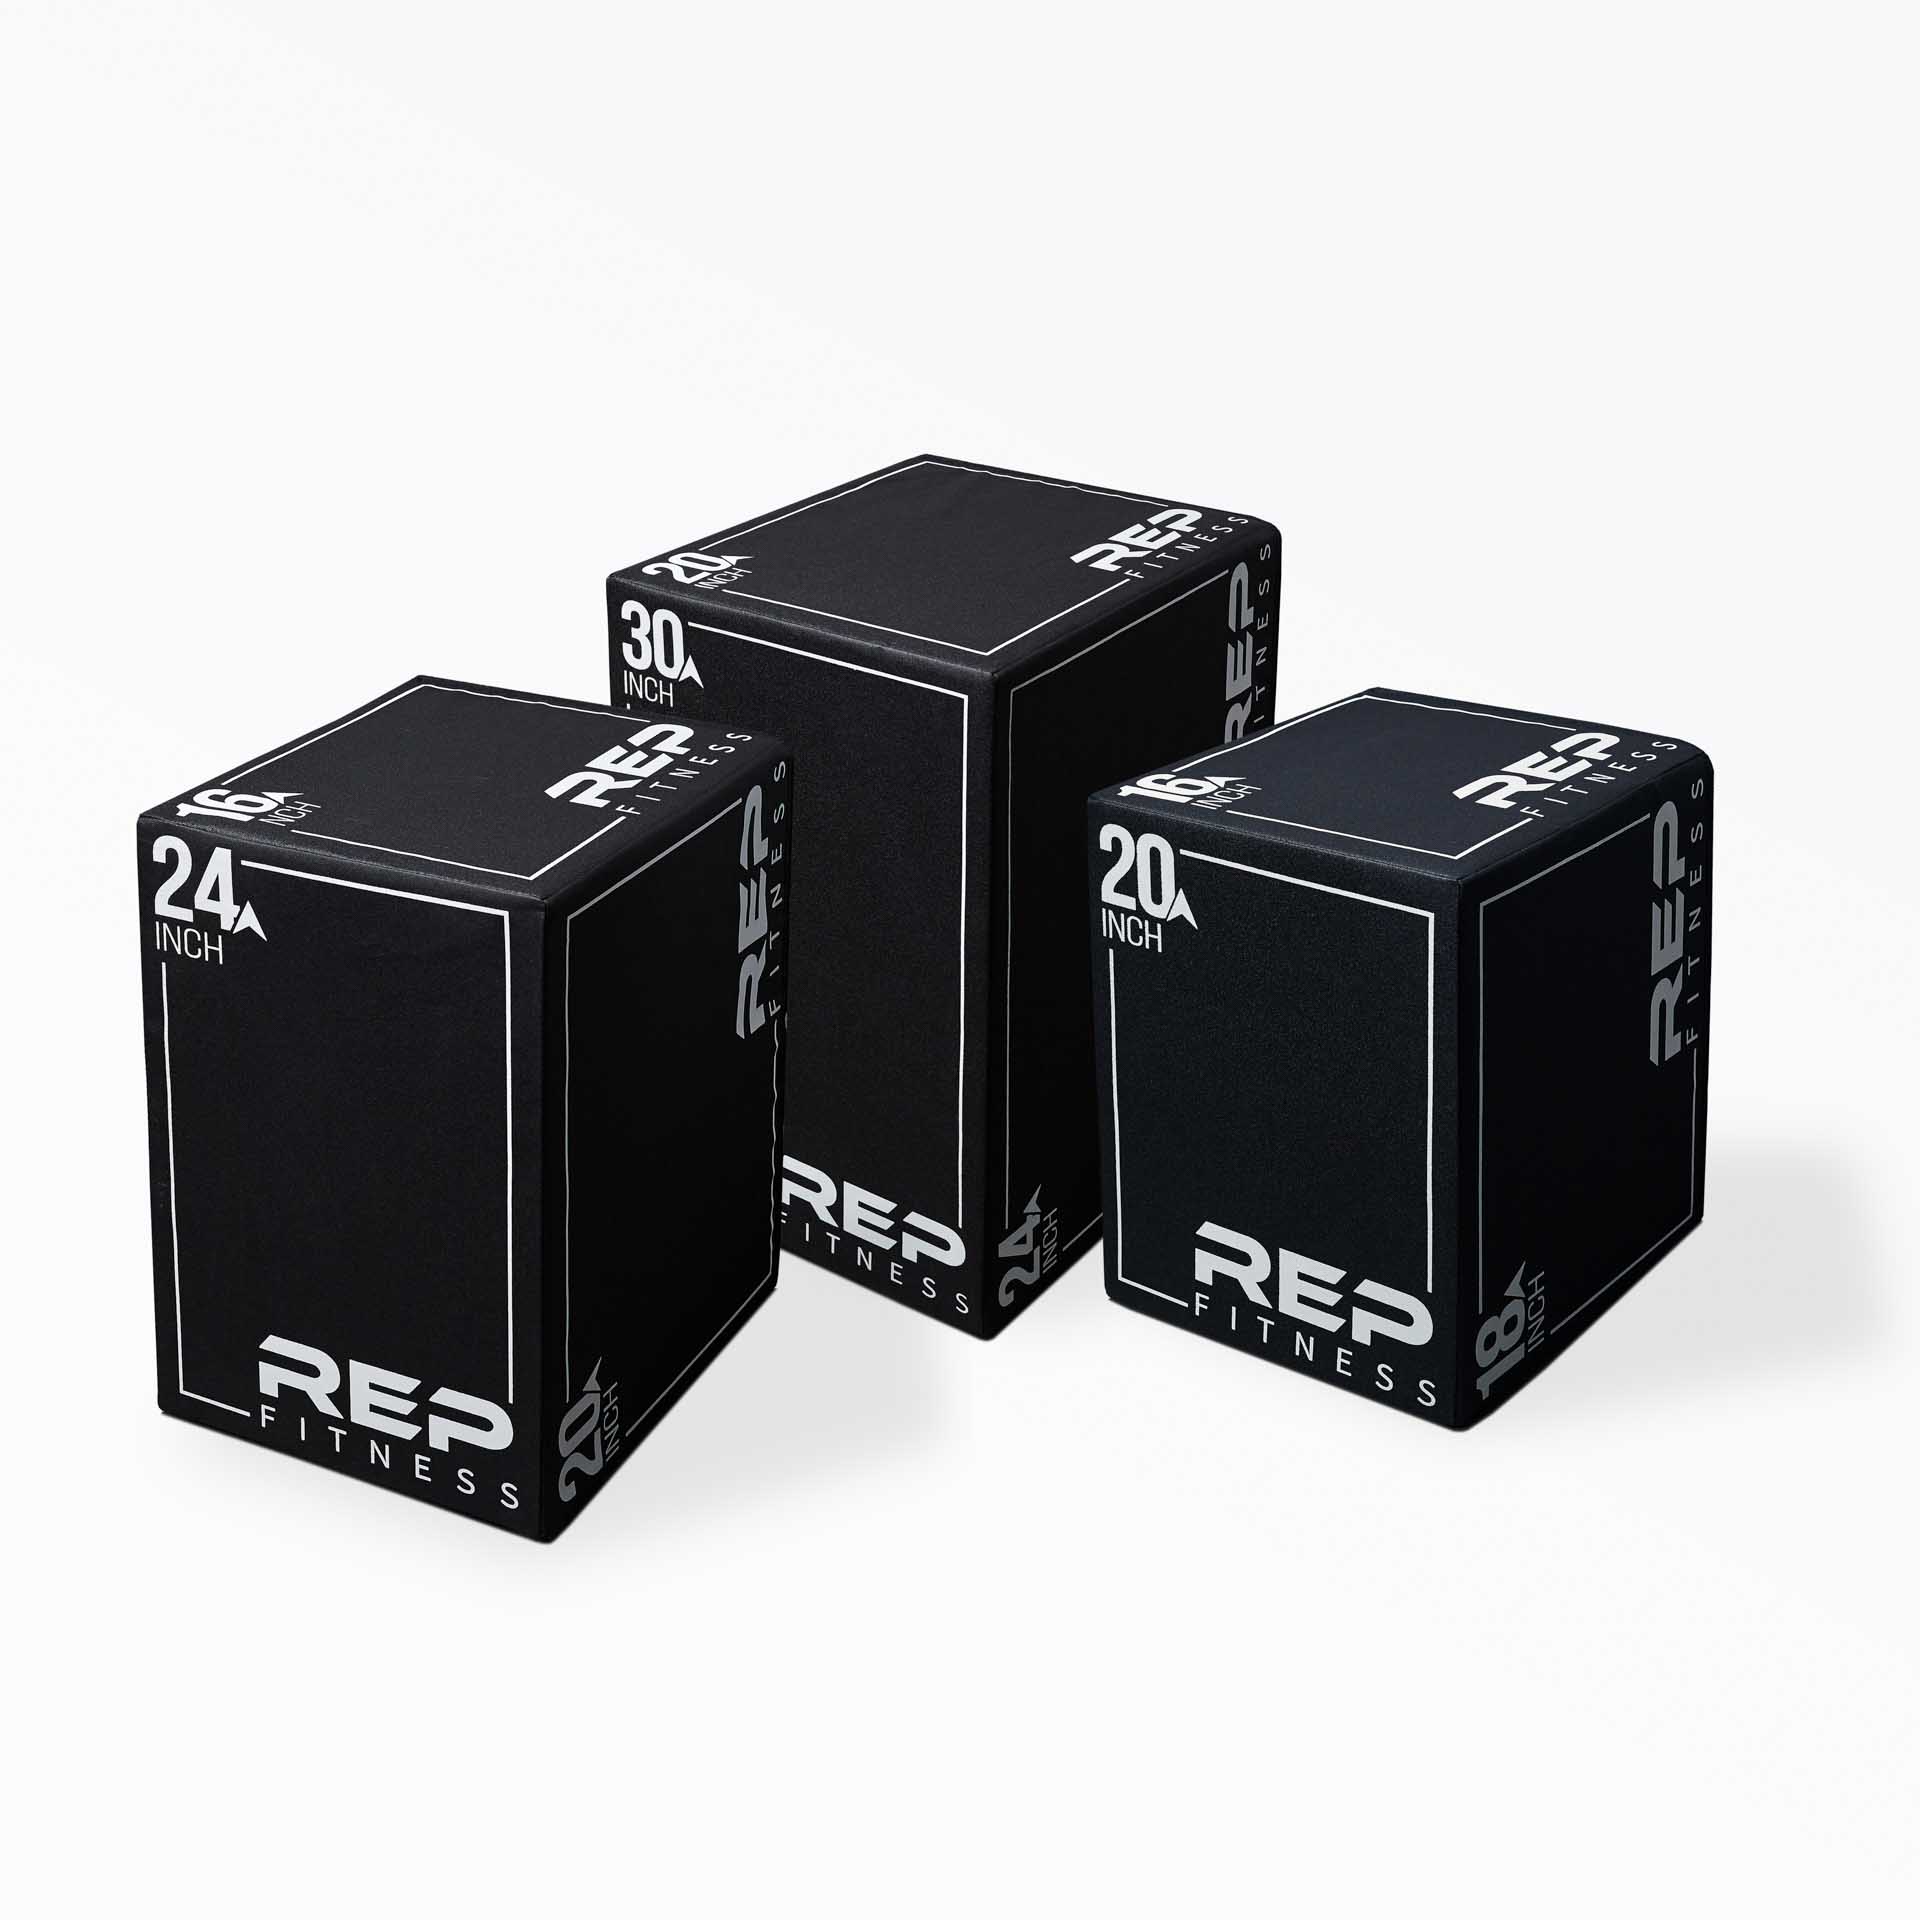 3-in-1 Soft Plyo Boxes, REP Fitness